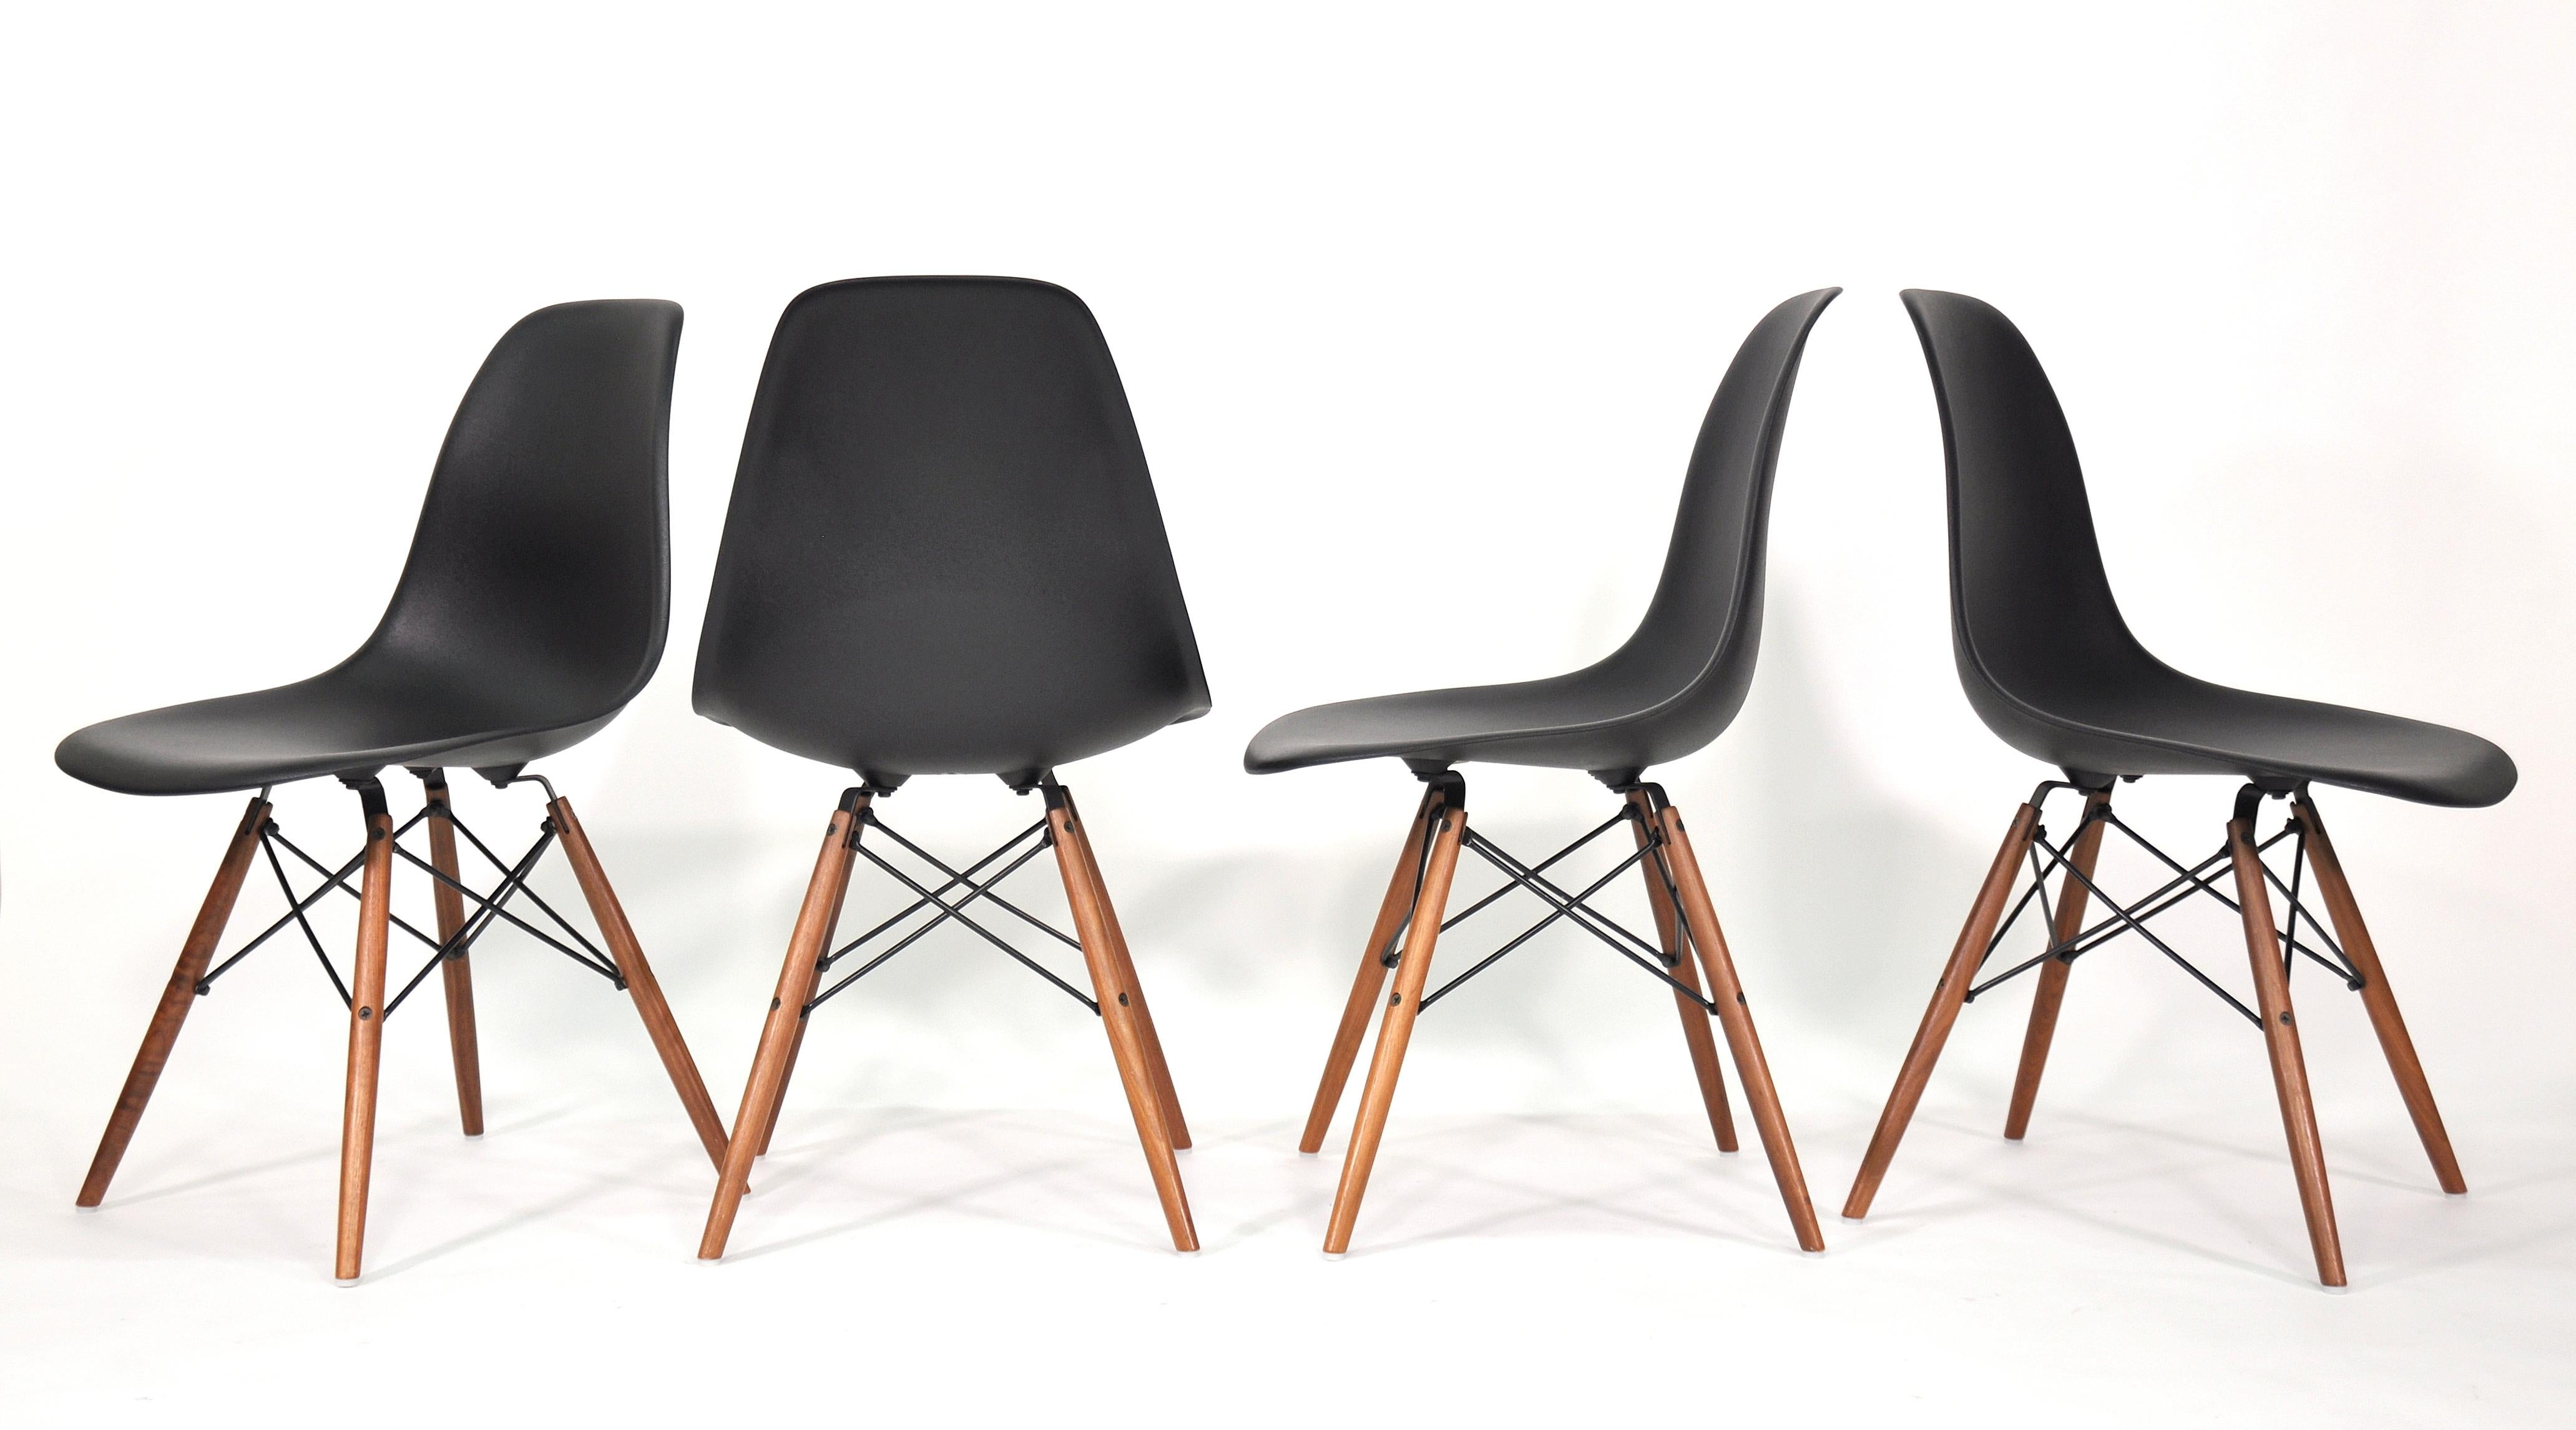 A set of 4 DSW black shell chairs designed by Charles and Ray Eames for Herman Miller in the 1950s. The dining or side chairs feature a molded black shell and walnut dowel 